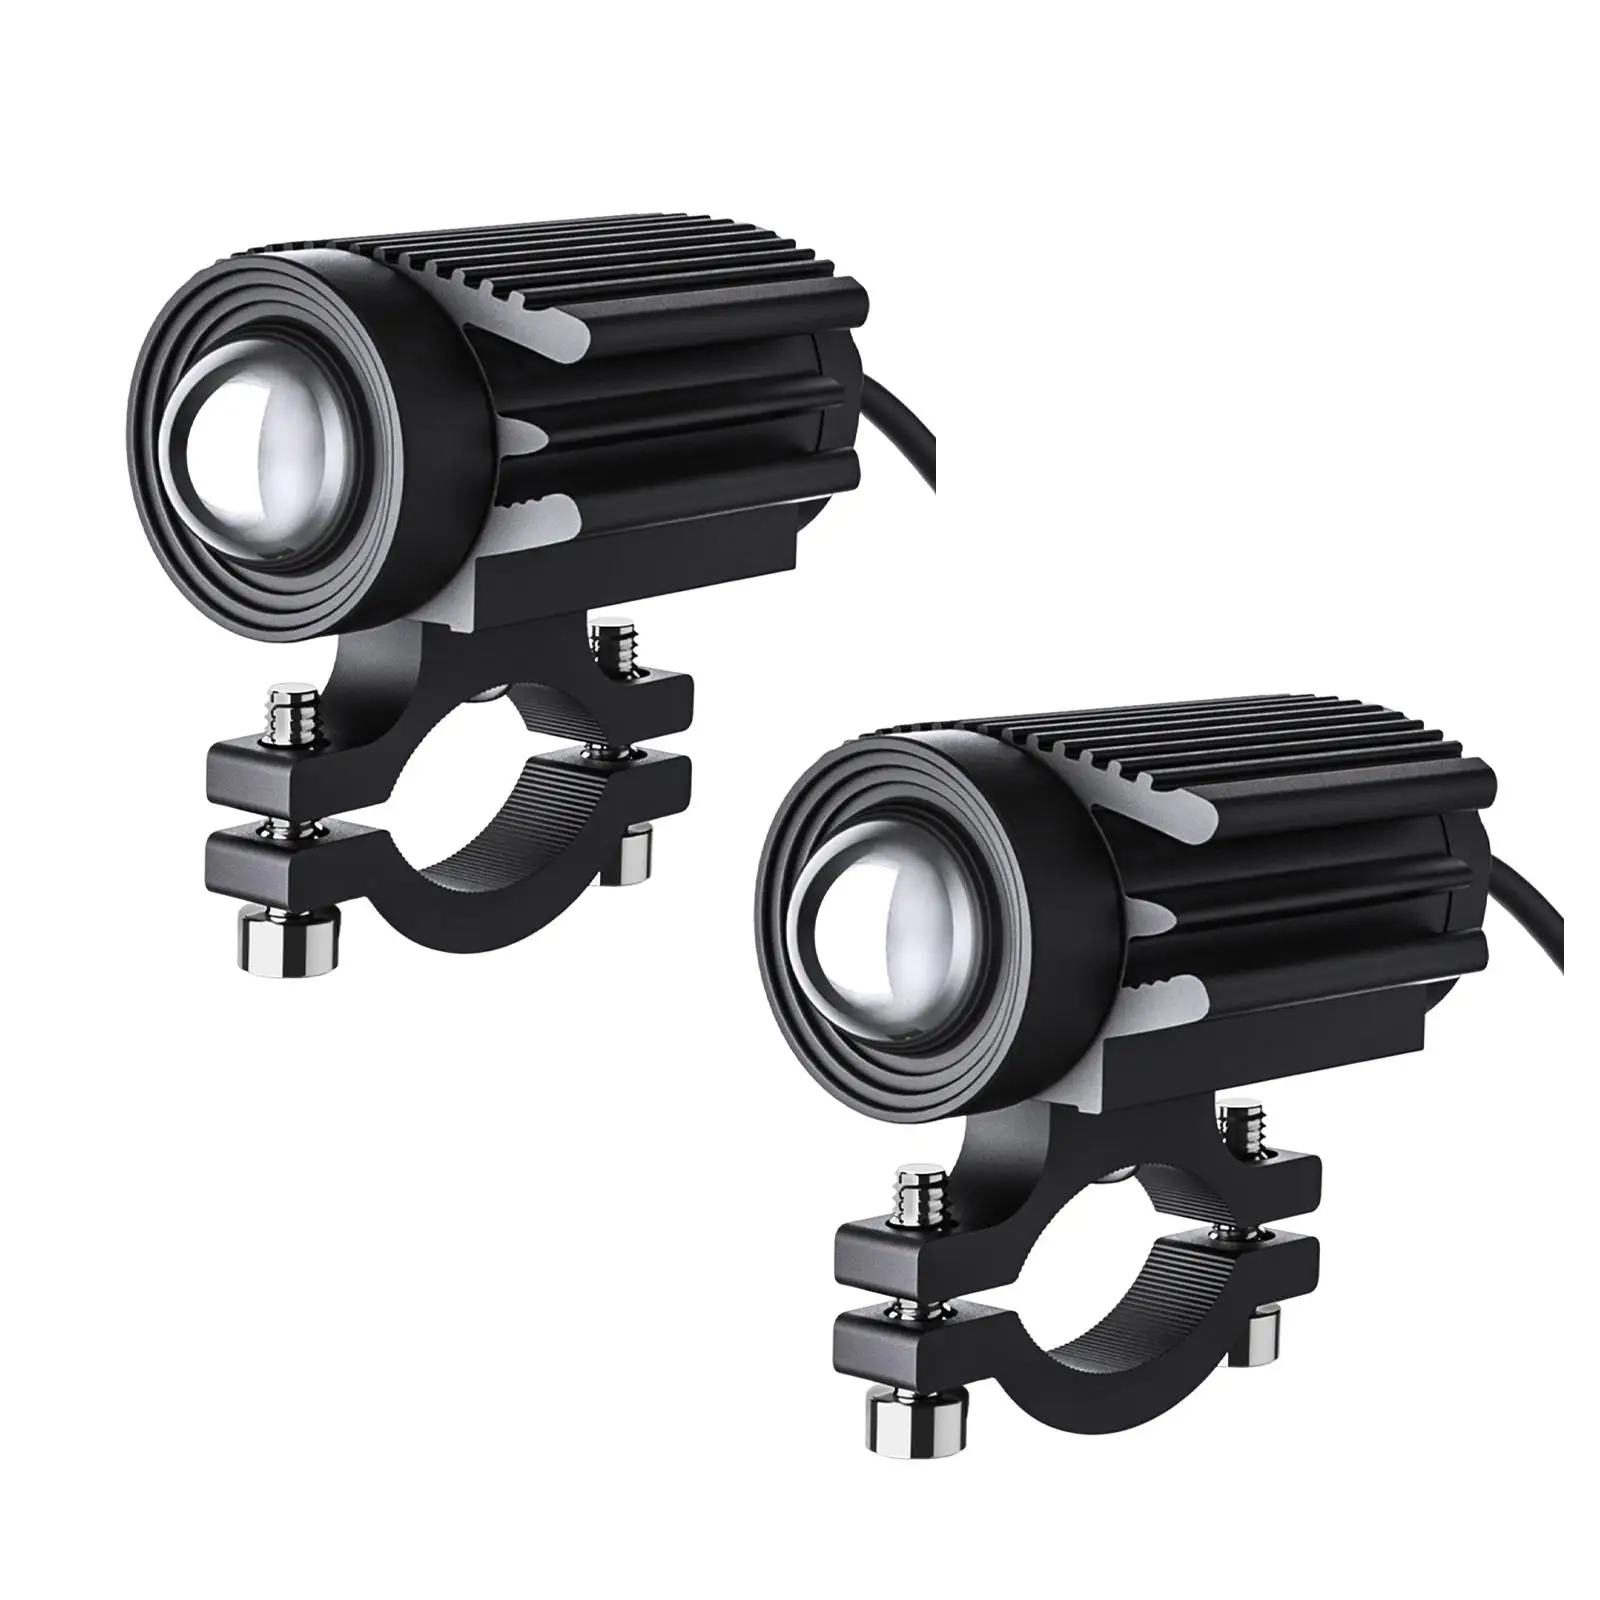 

2 Pieces Motorcycle Front Spotlights Auxiliary Lamp Low Power Consumption Motorcycle Foglights